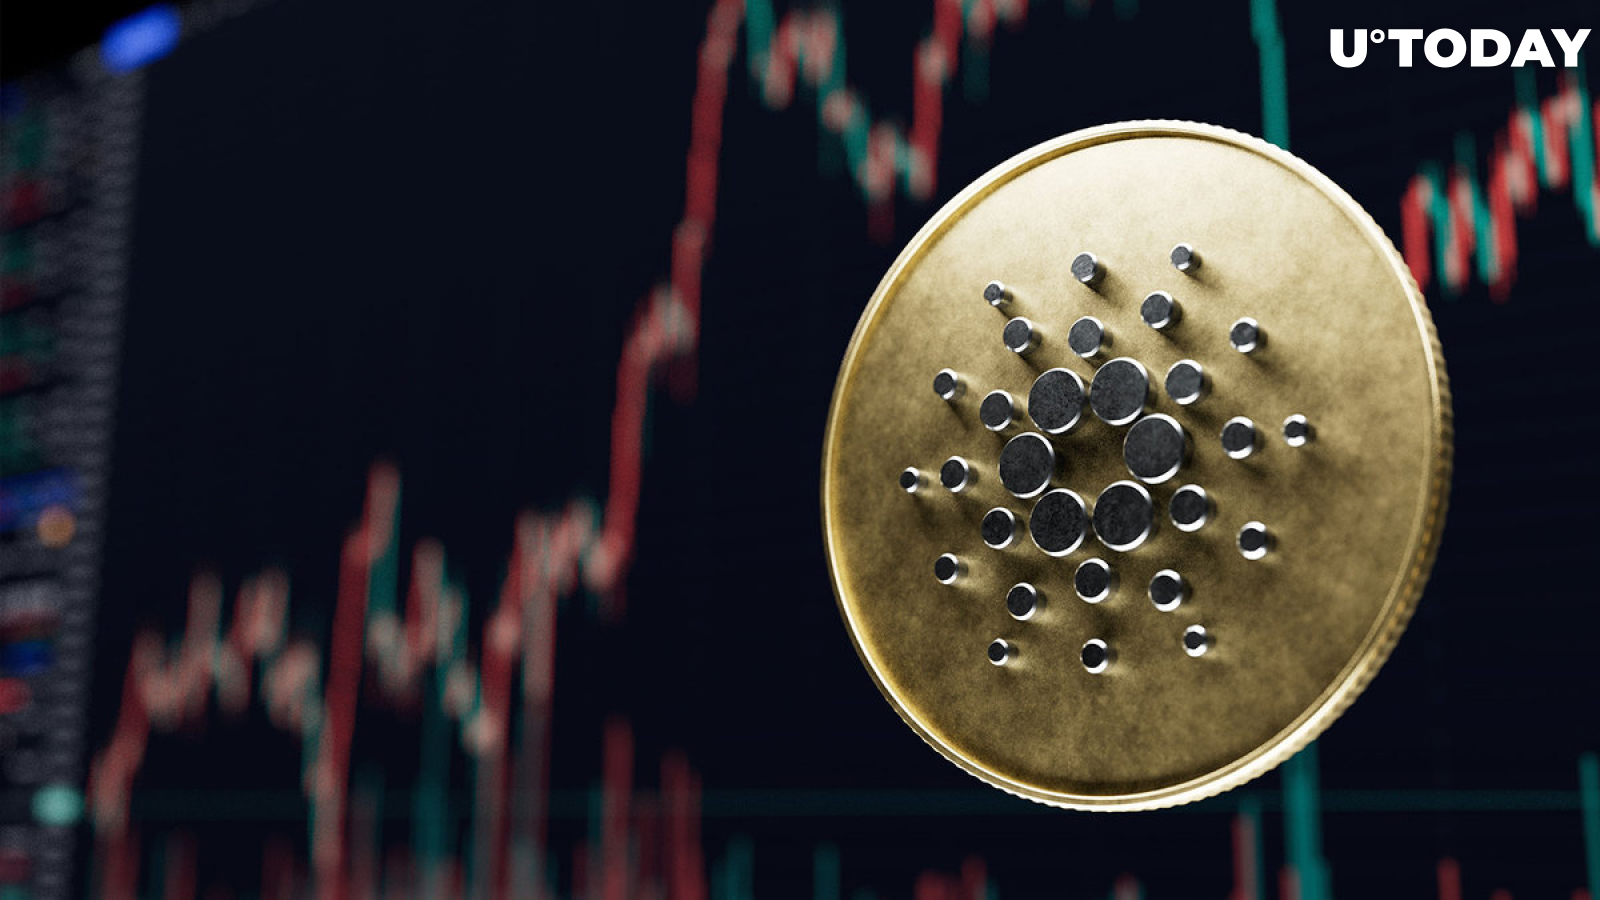 Cardano Blockchain Insights Reveal Abnormal Increase in This Metric: Details